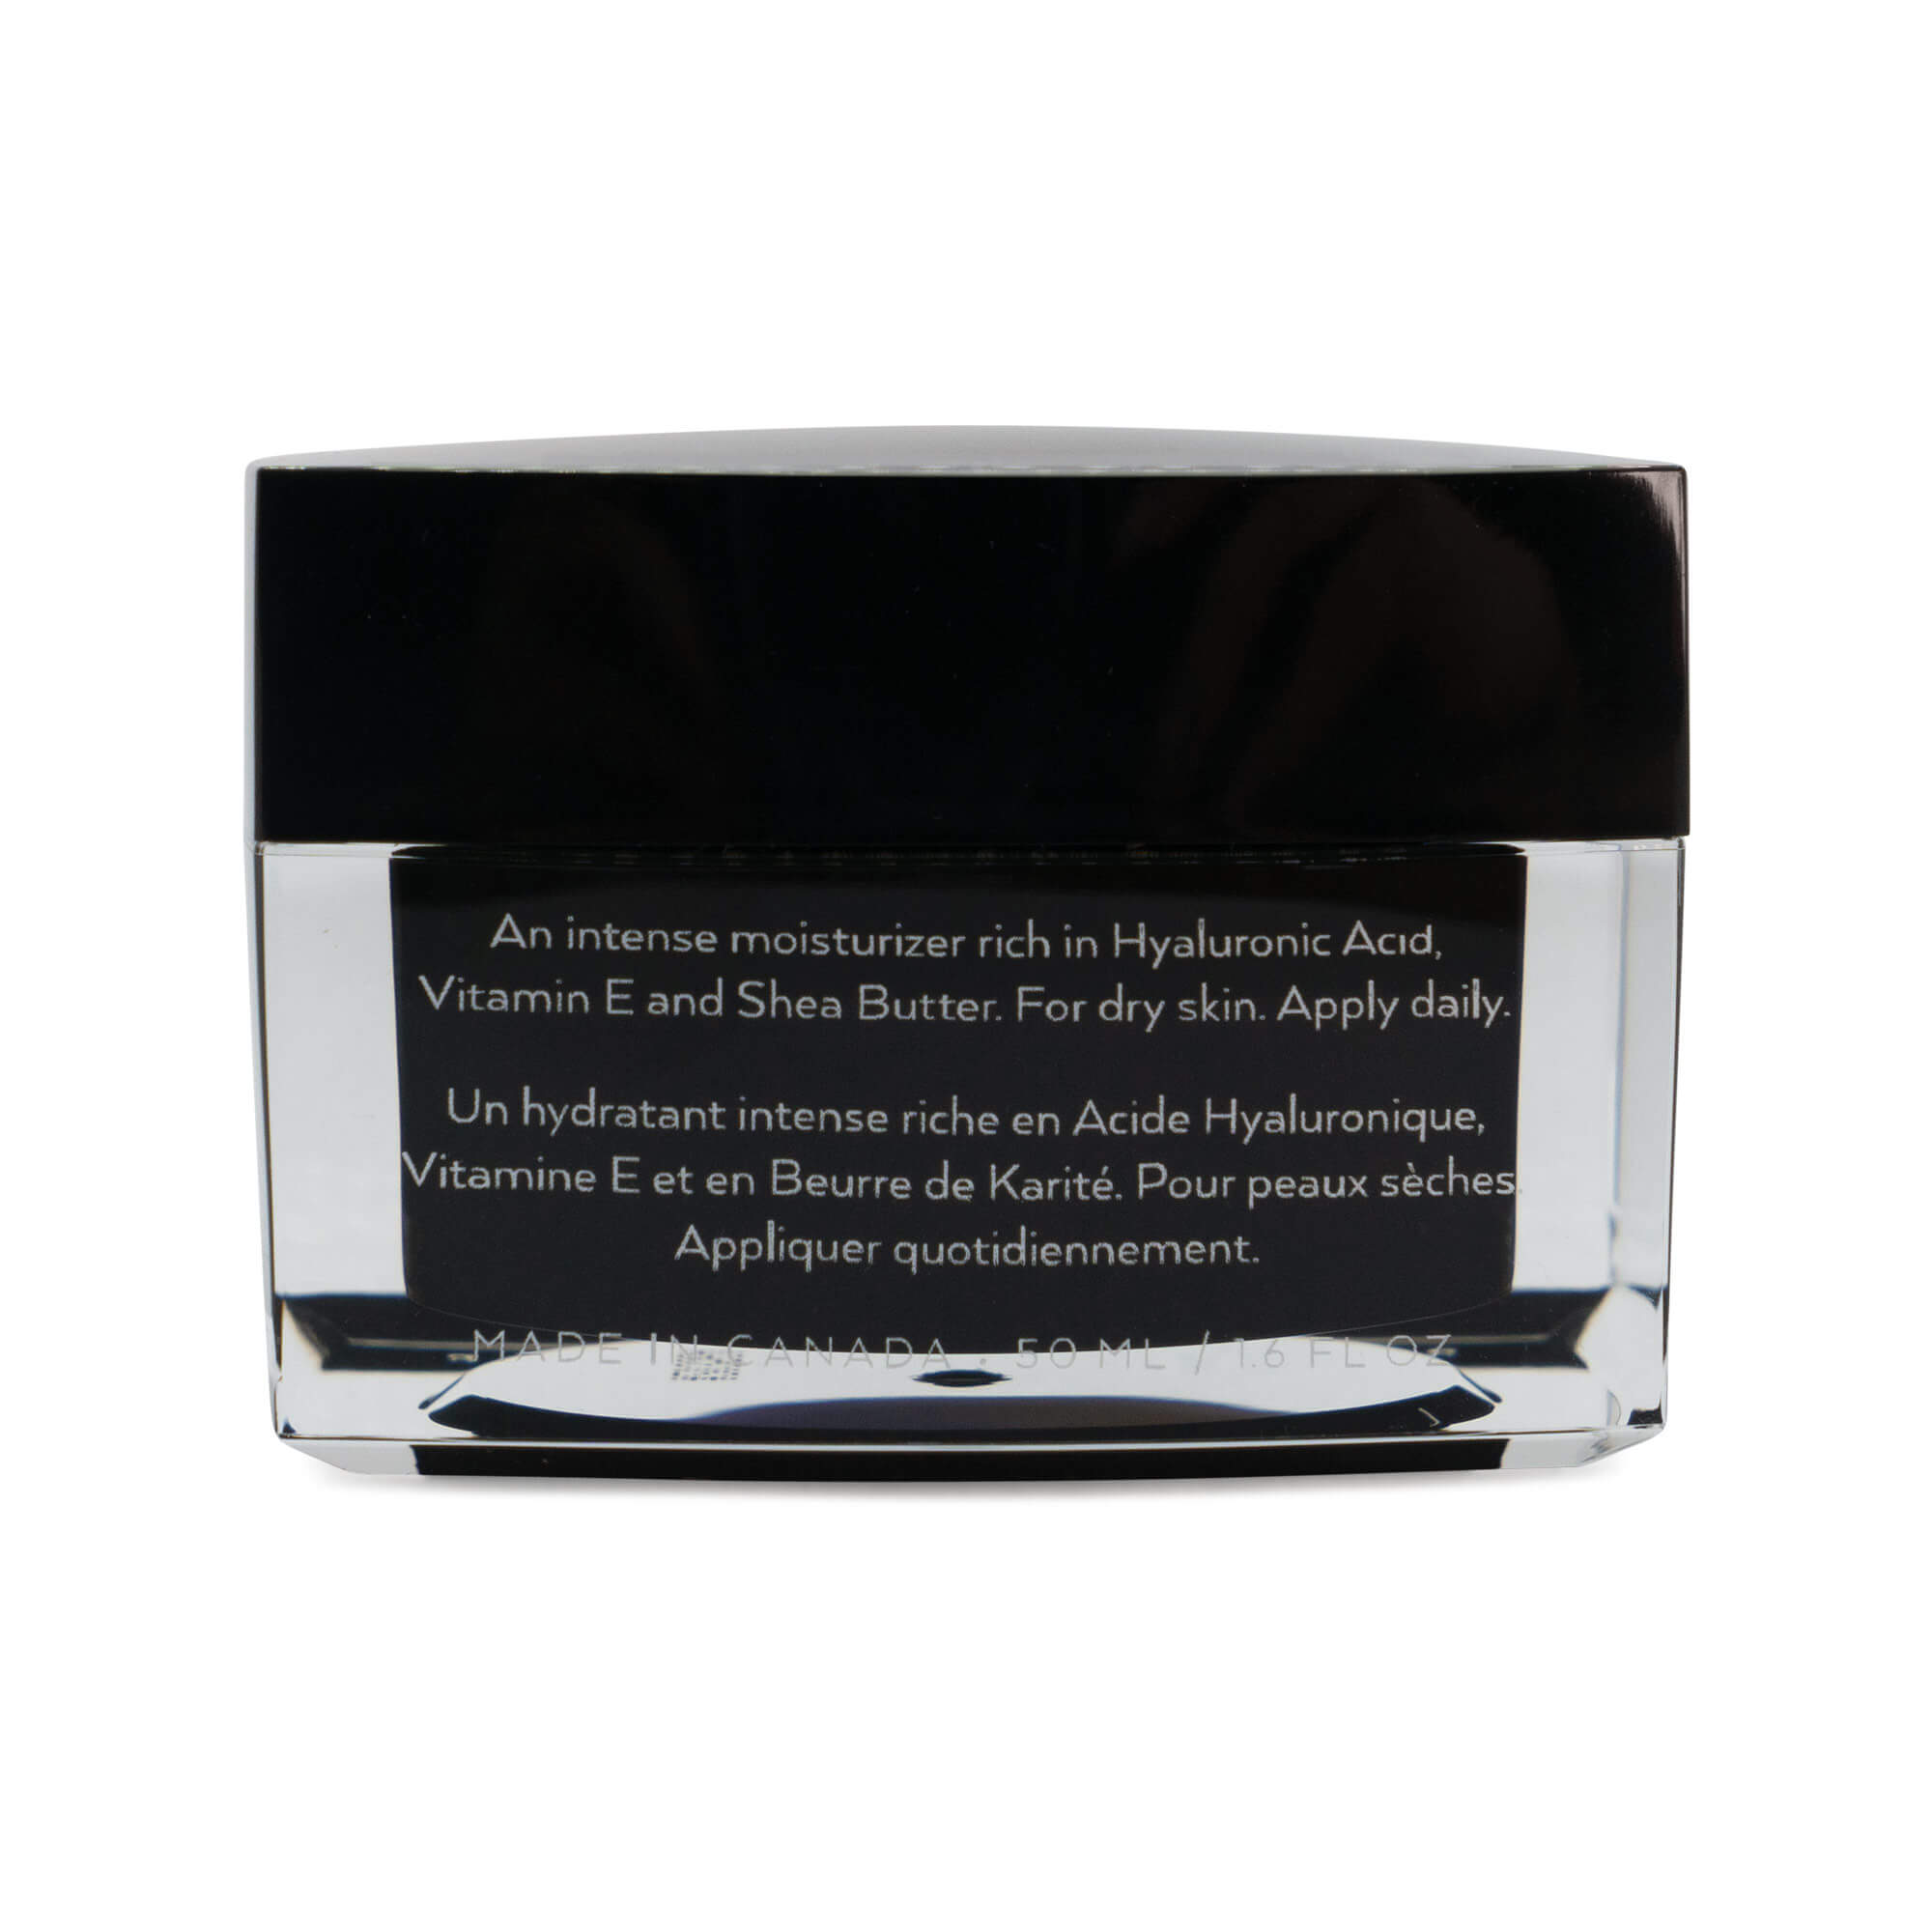 The Hydrating Glow-Hyaluronic Moisturizer